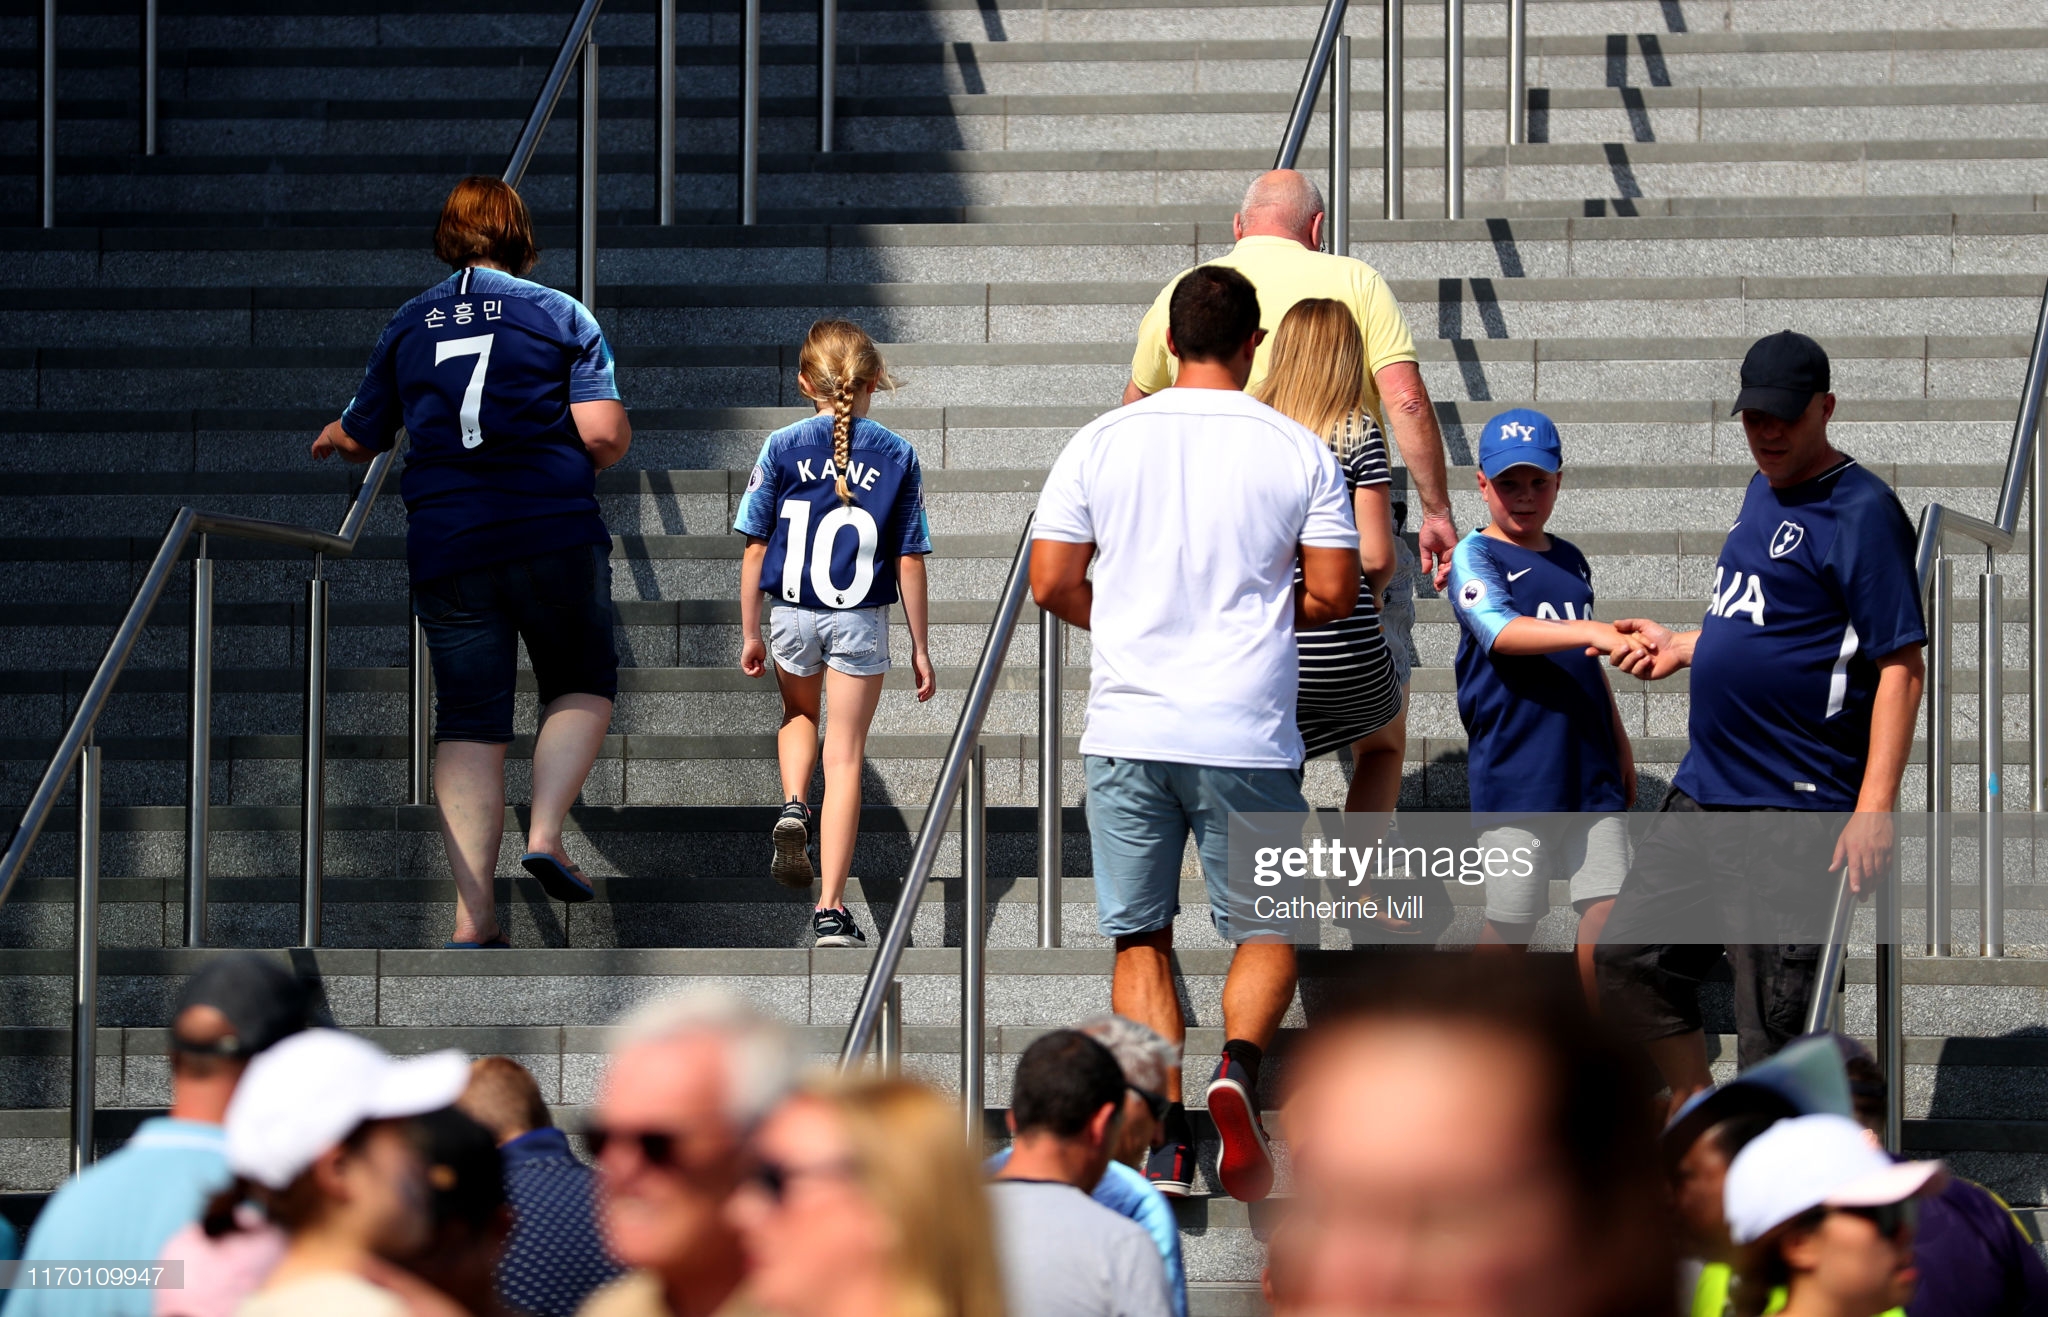 gettyimages-1170109947-2048x2048.jpg